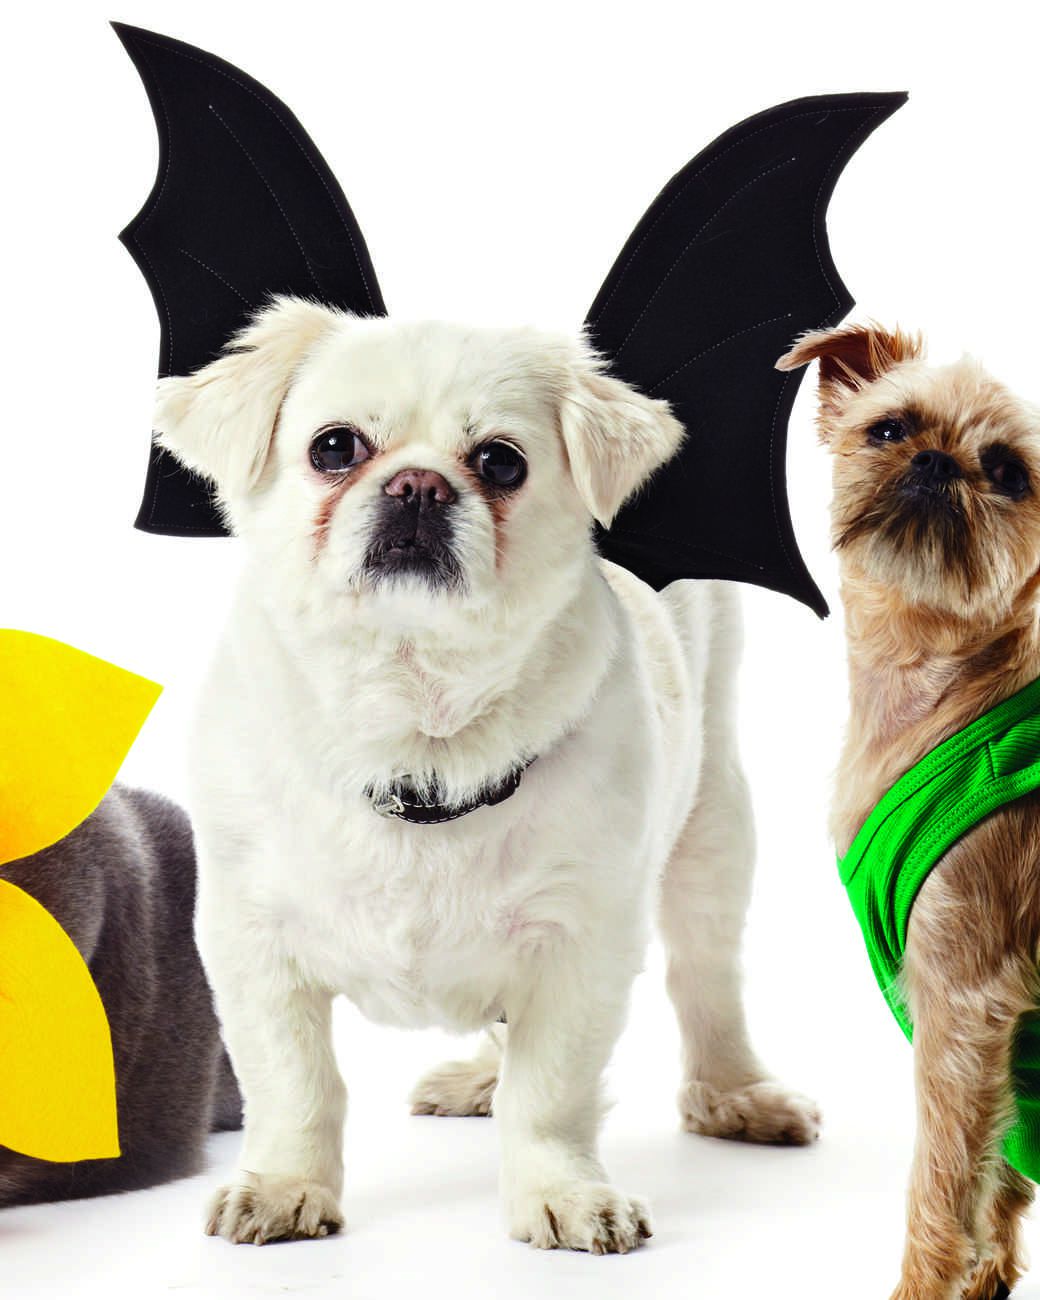 AMENON Halloween Costumes Pets Dogs Cats Bat Wings Skeleton Spider Pets Costume for Small Medium Dogs Halloween Party Pet Shirt Cosplay Hoodies Dress Up Funny Pet Clothes Kitten Puppy Apparel 